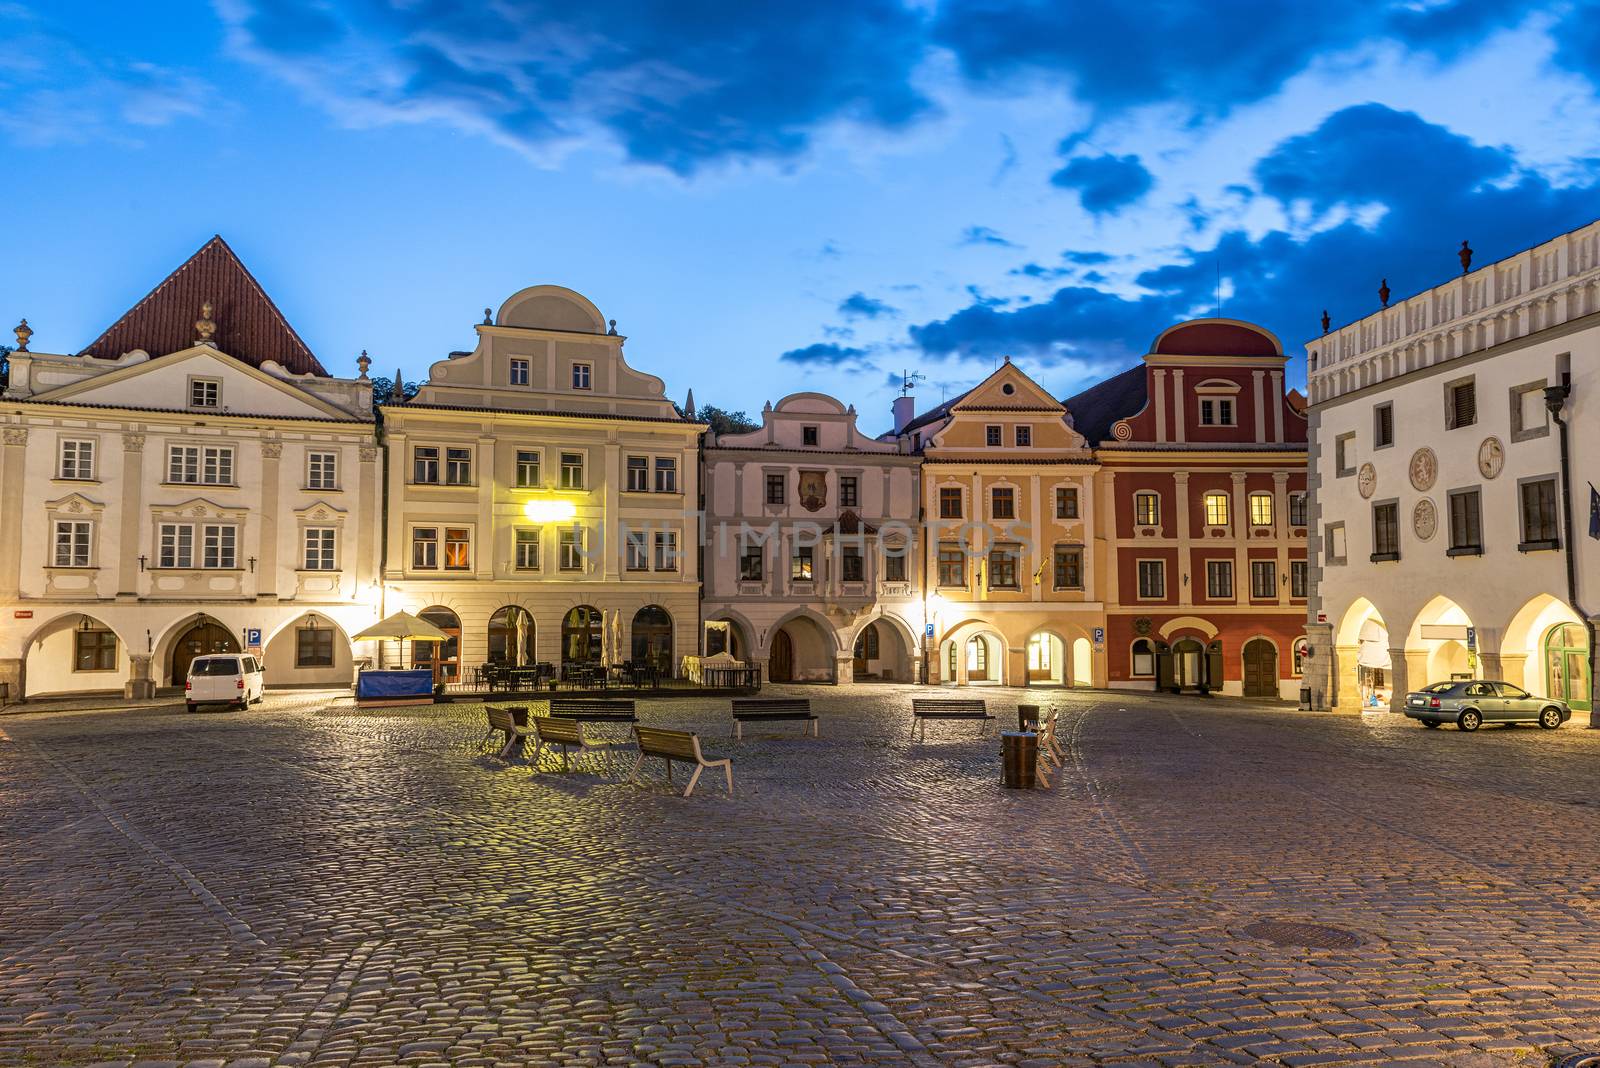 Empty town square in Cesky Krumlov early evening by fyletto